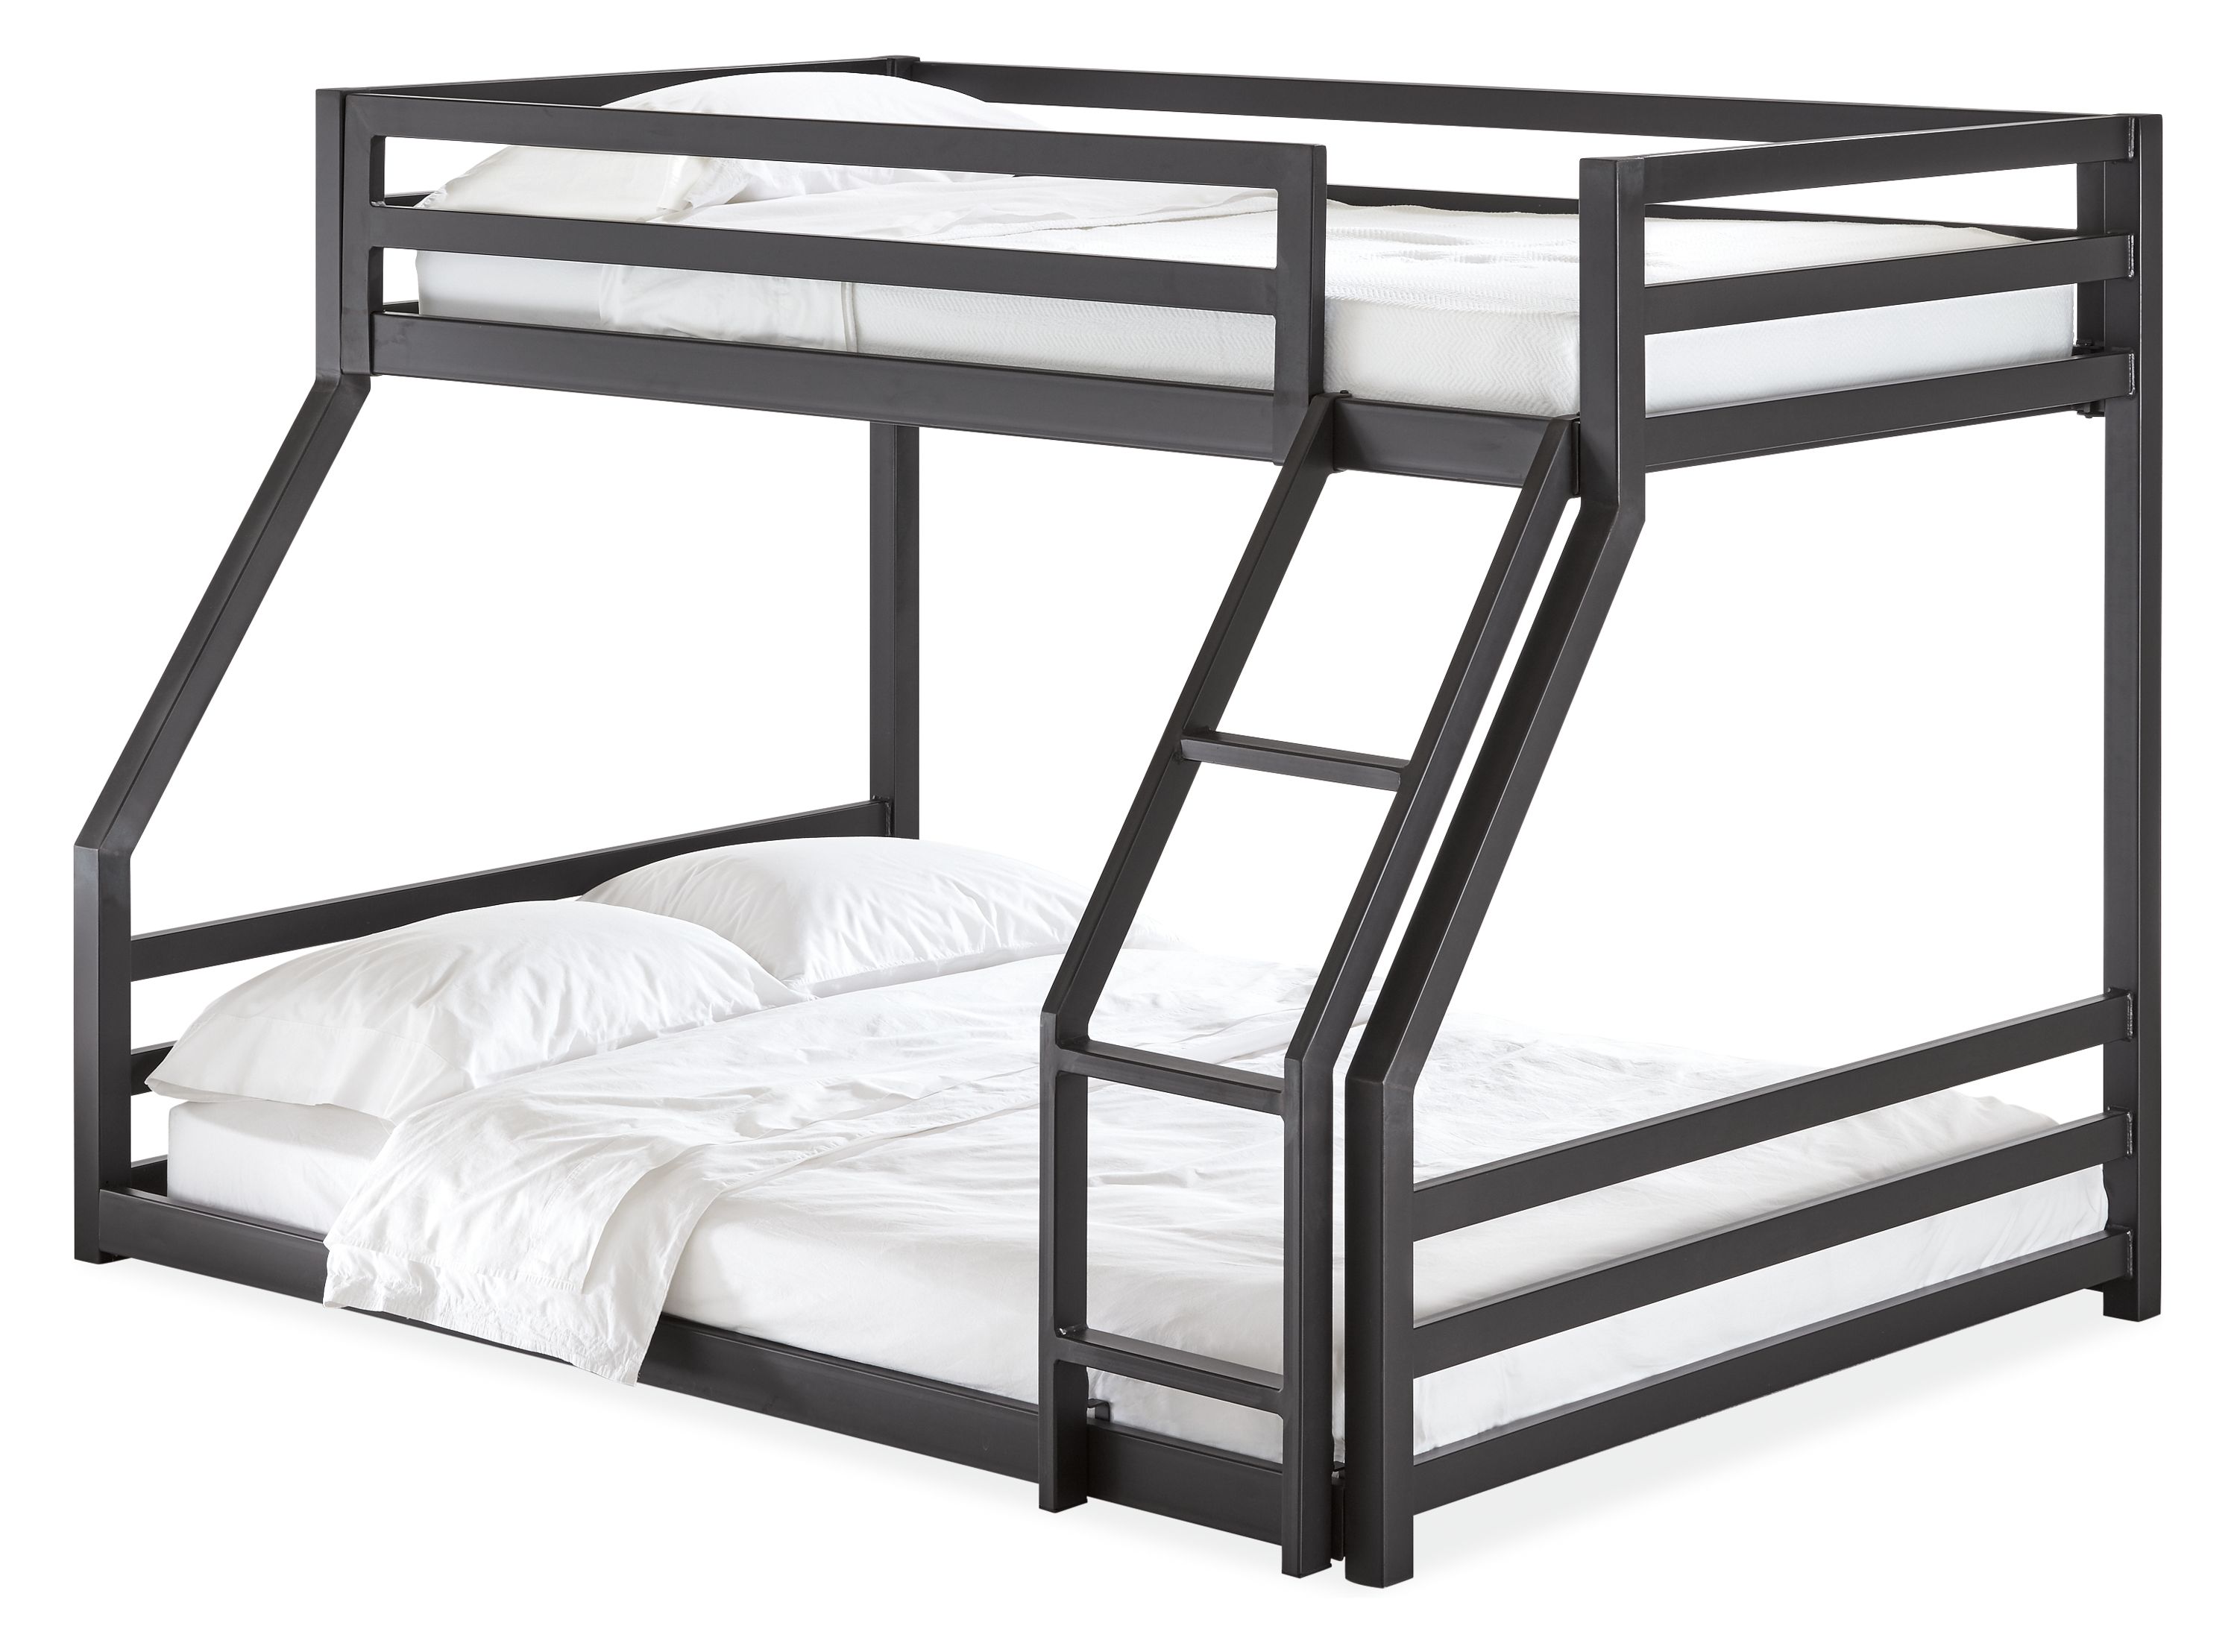 Fort Bunk Beds Modern Kids Furniture, Rooms To Go Bunk Bed Assembly Instructions